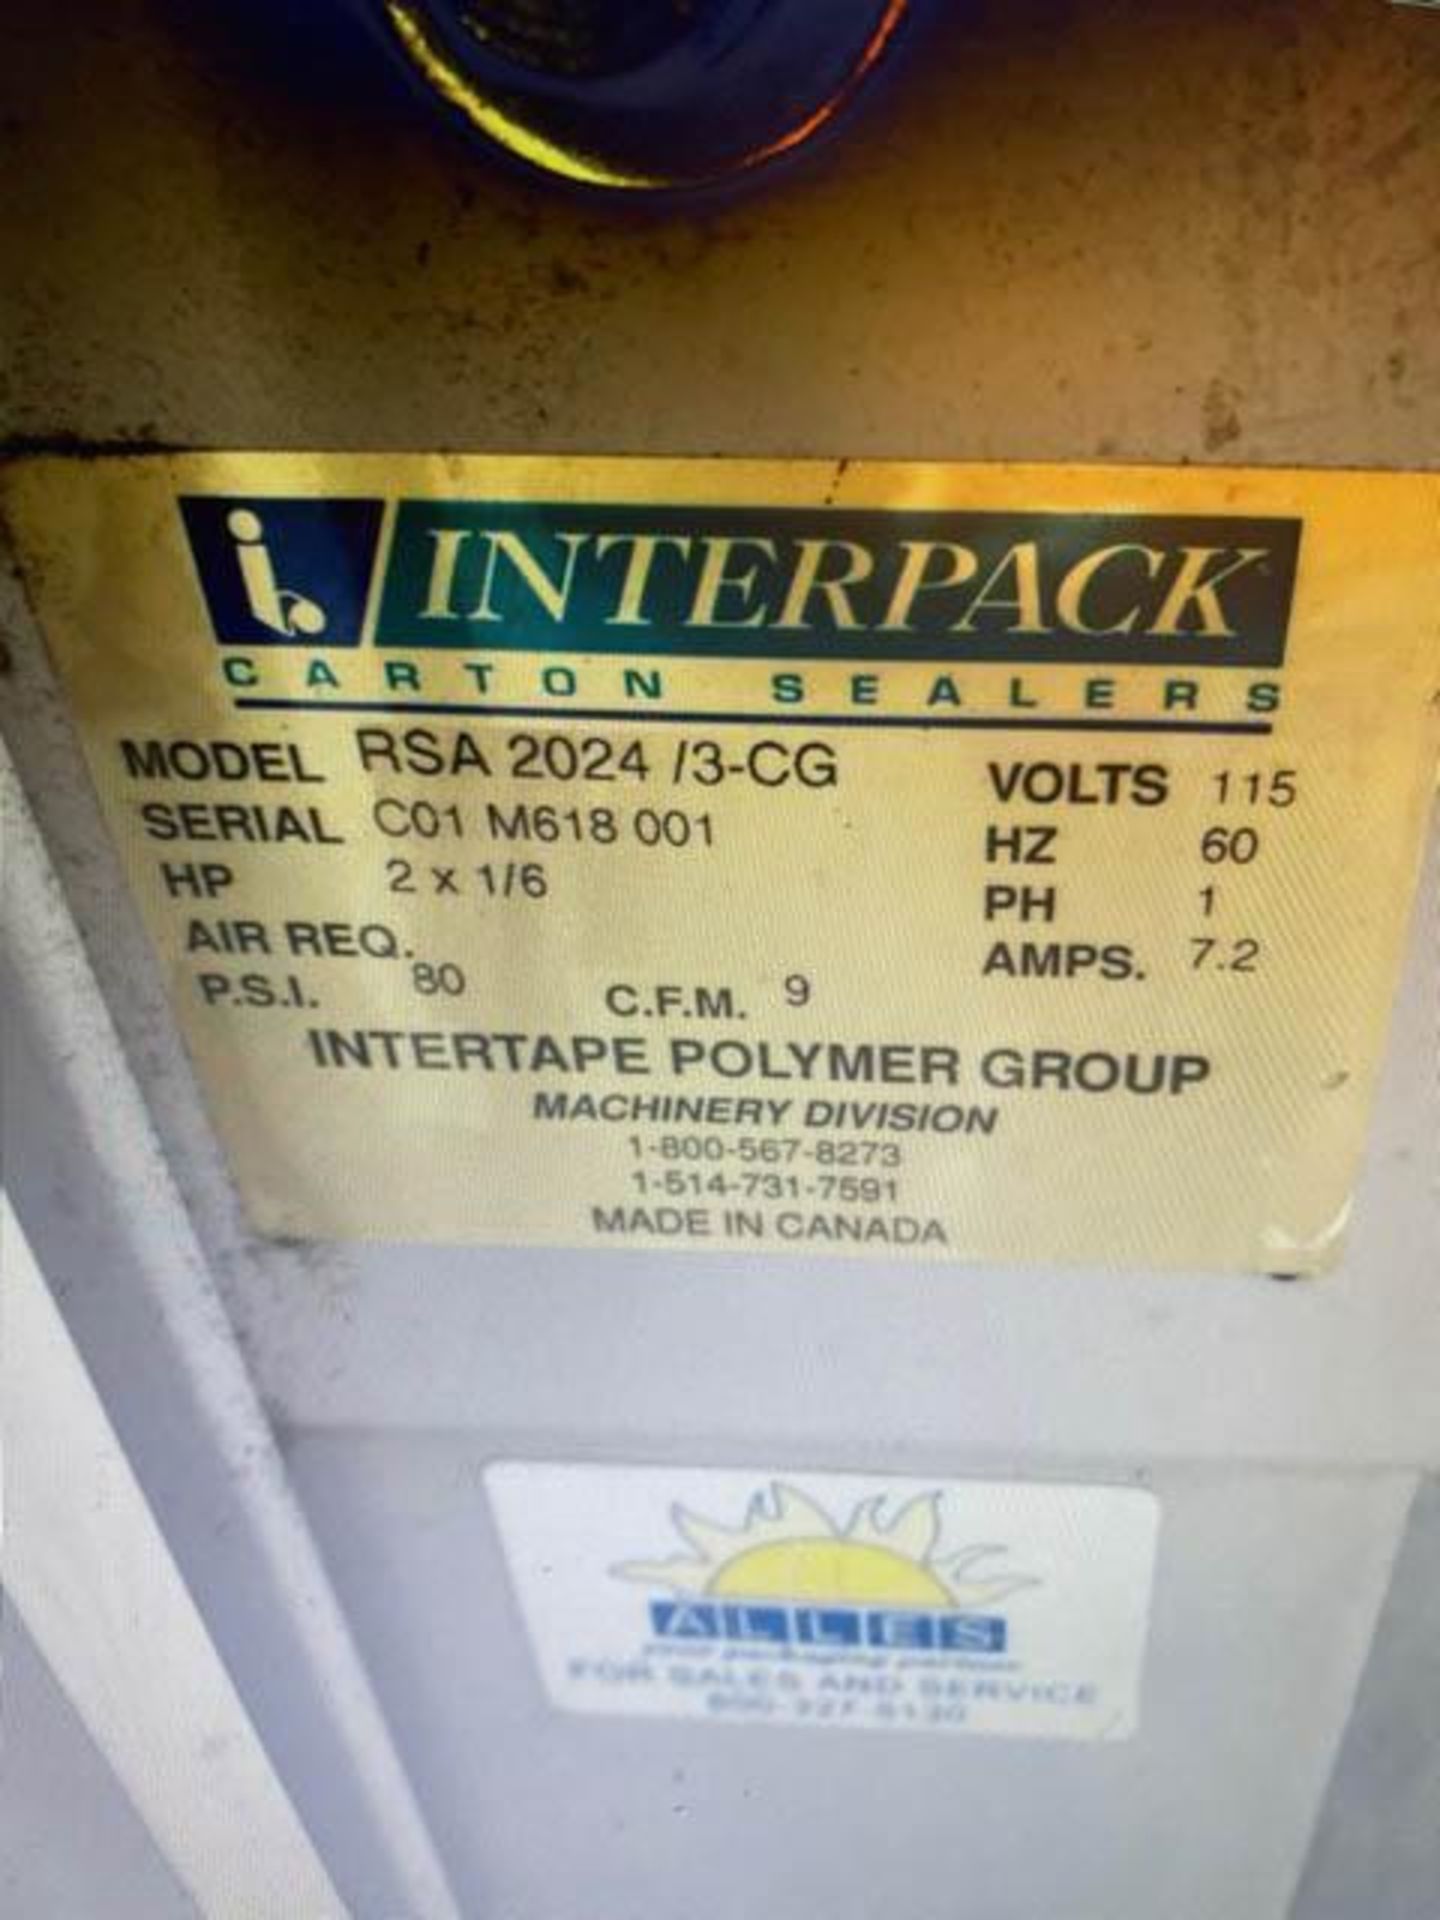 Interpack Taping Machine, Model: RSA 2024/3-CG, S/N: C01 M618 001 - Located At Surplus MGT. - Ft. La - Image 2 of 3